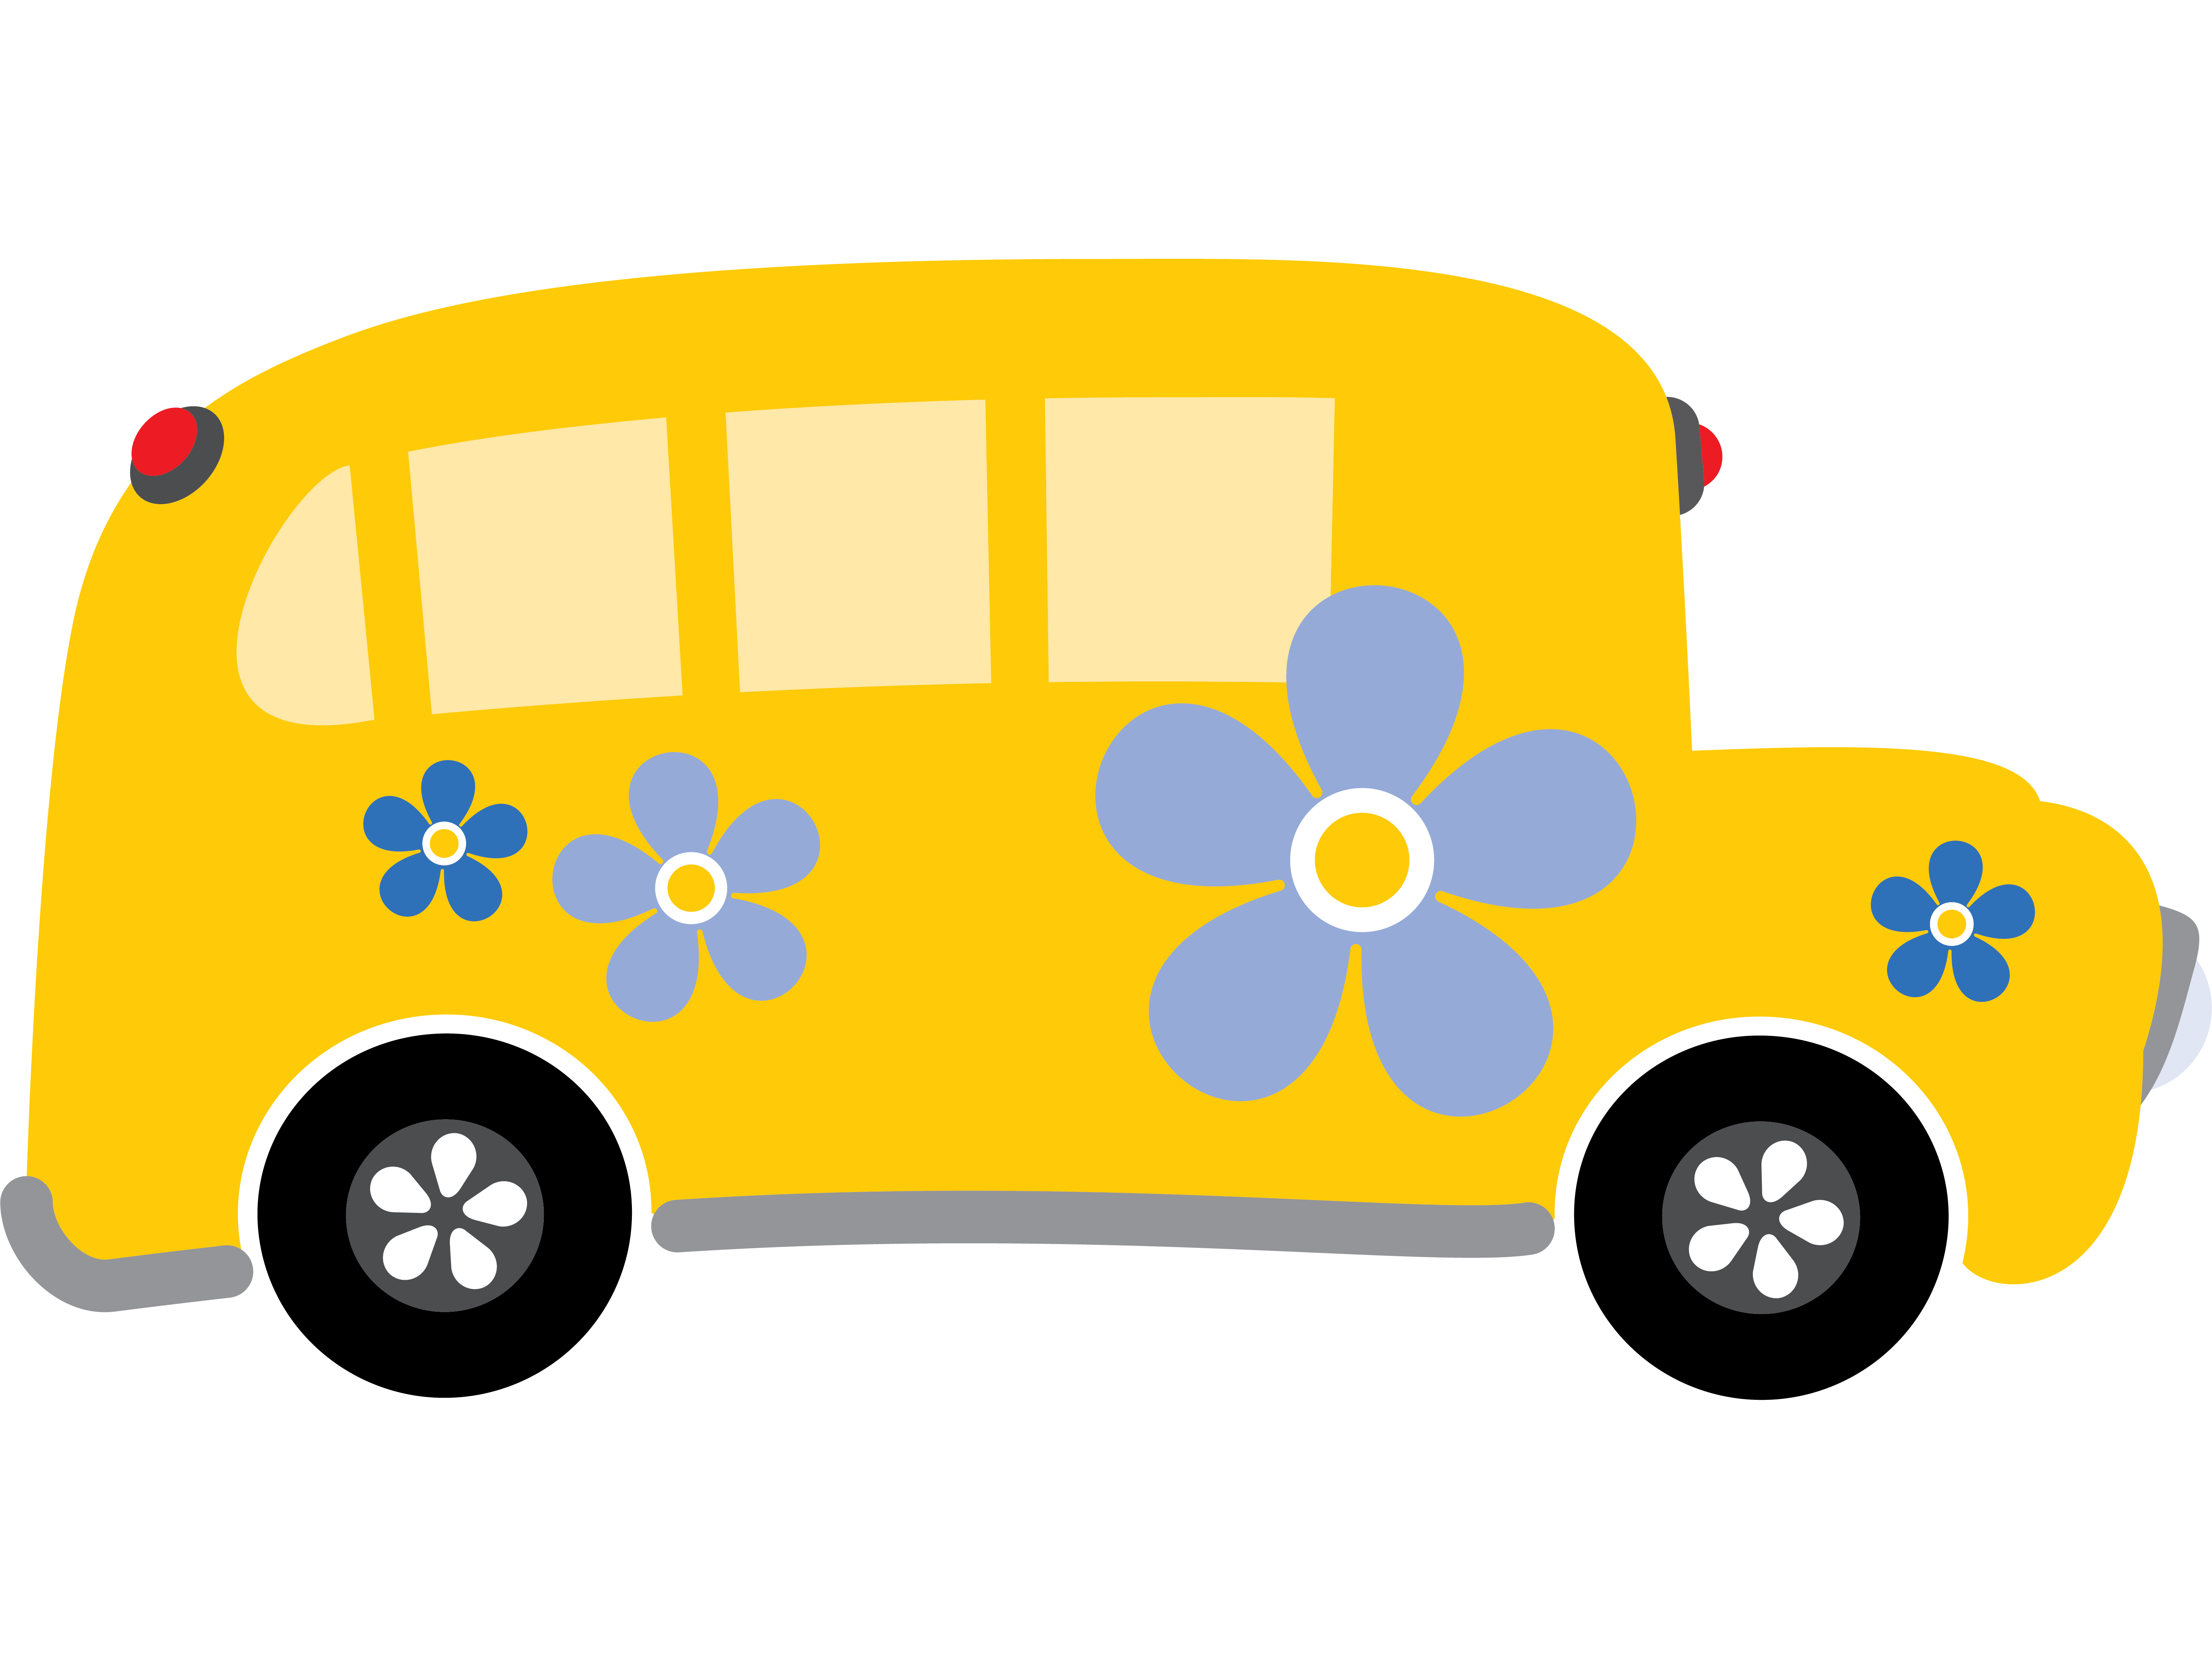 Illustration of a yellow school bus with blue forget-me-nots painted on the side